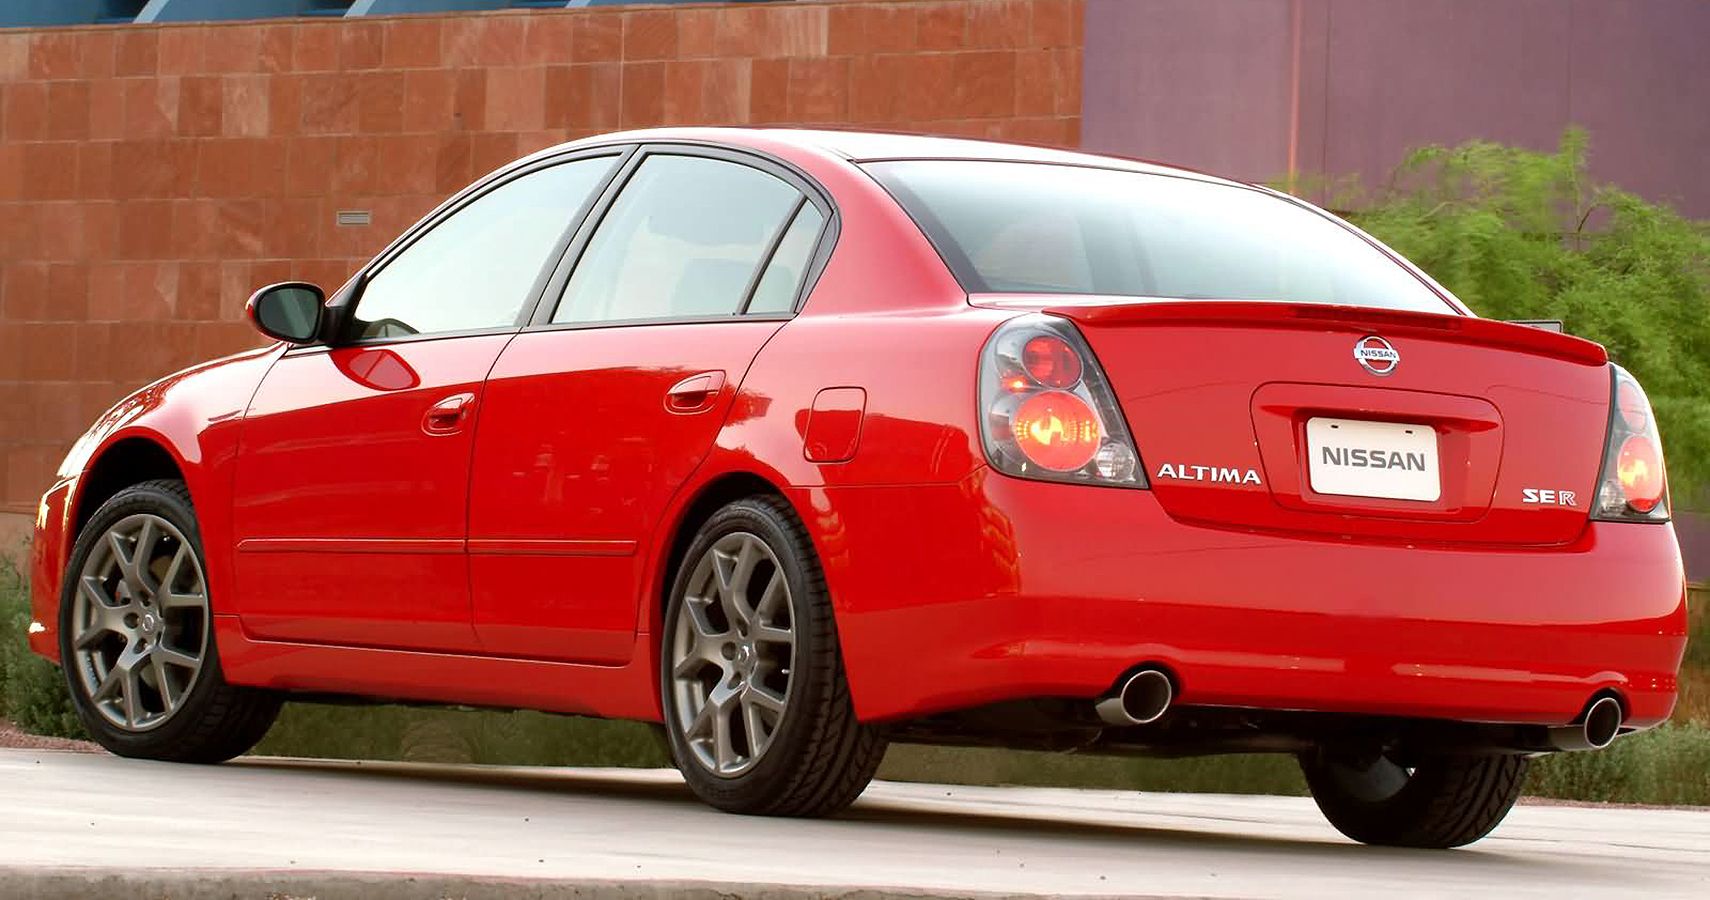 Red 2005 Nissan Altima Parked